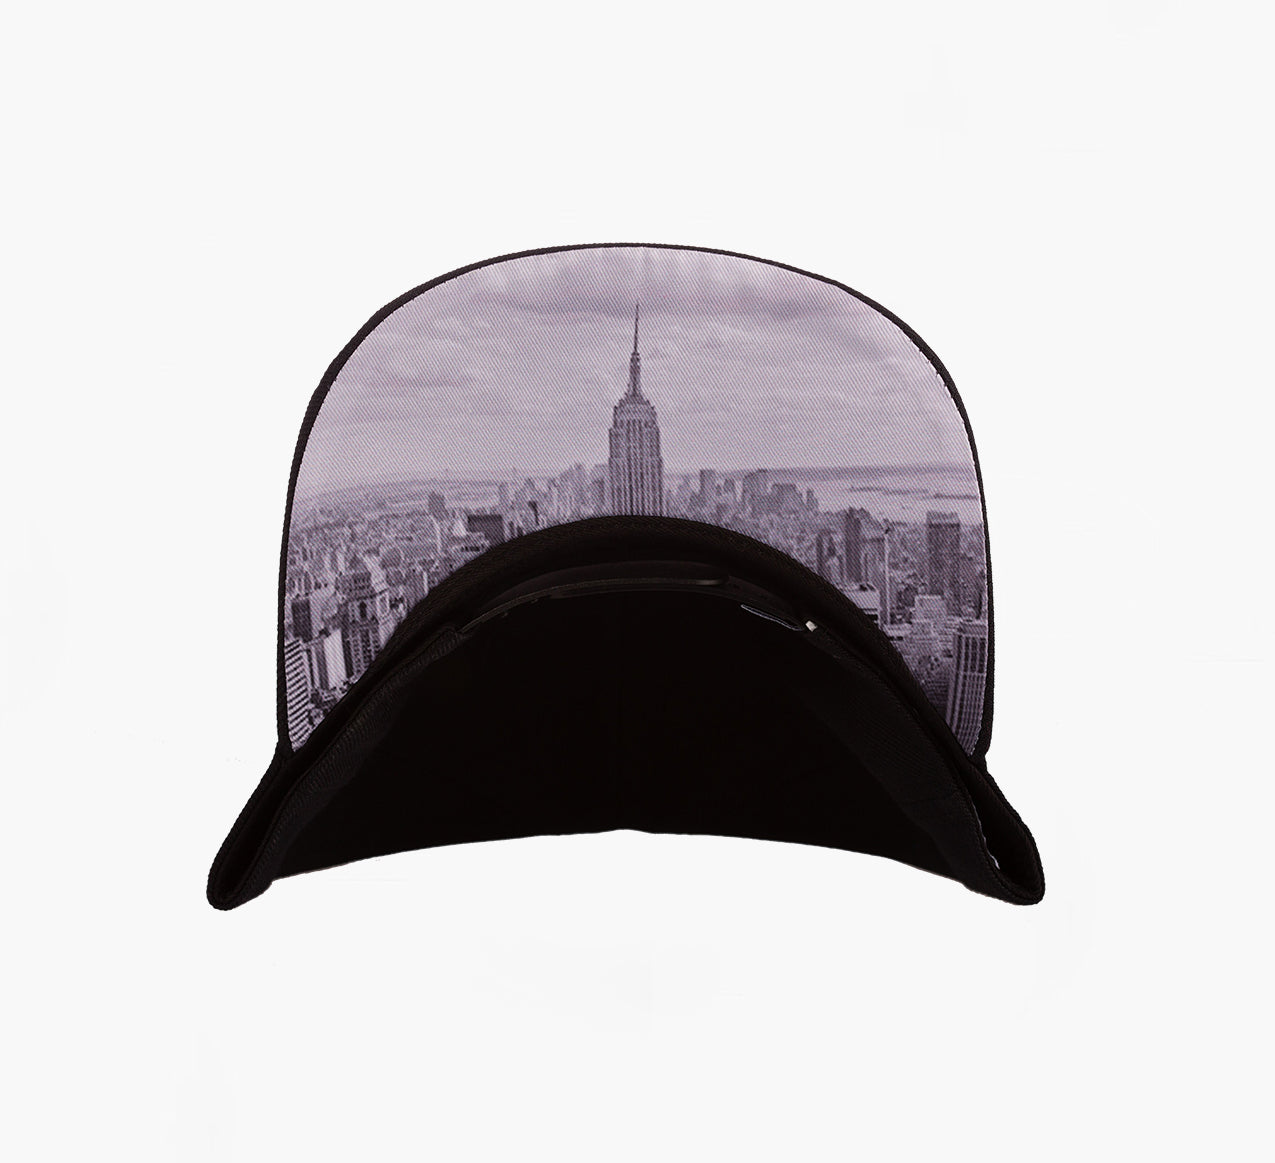 Empire state of mind Snapback Hat